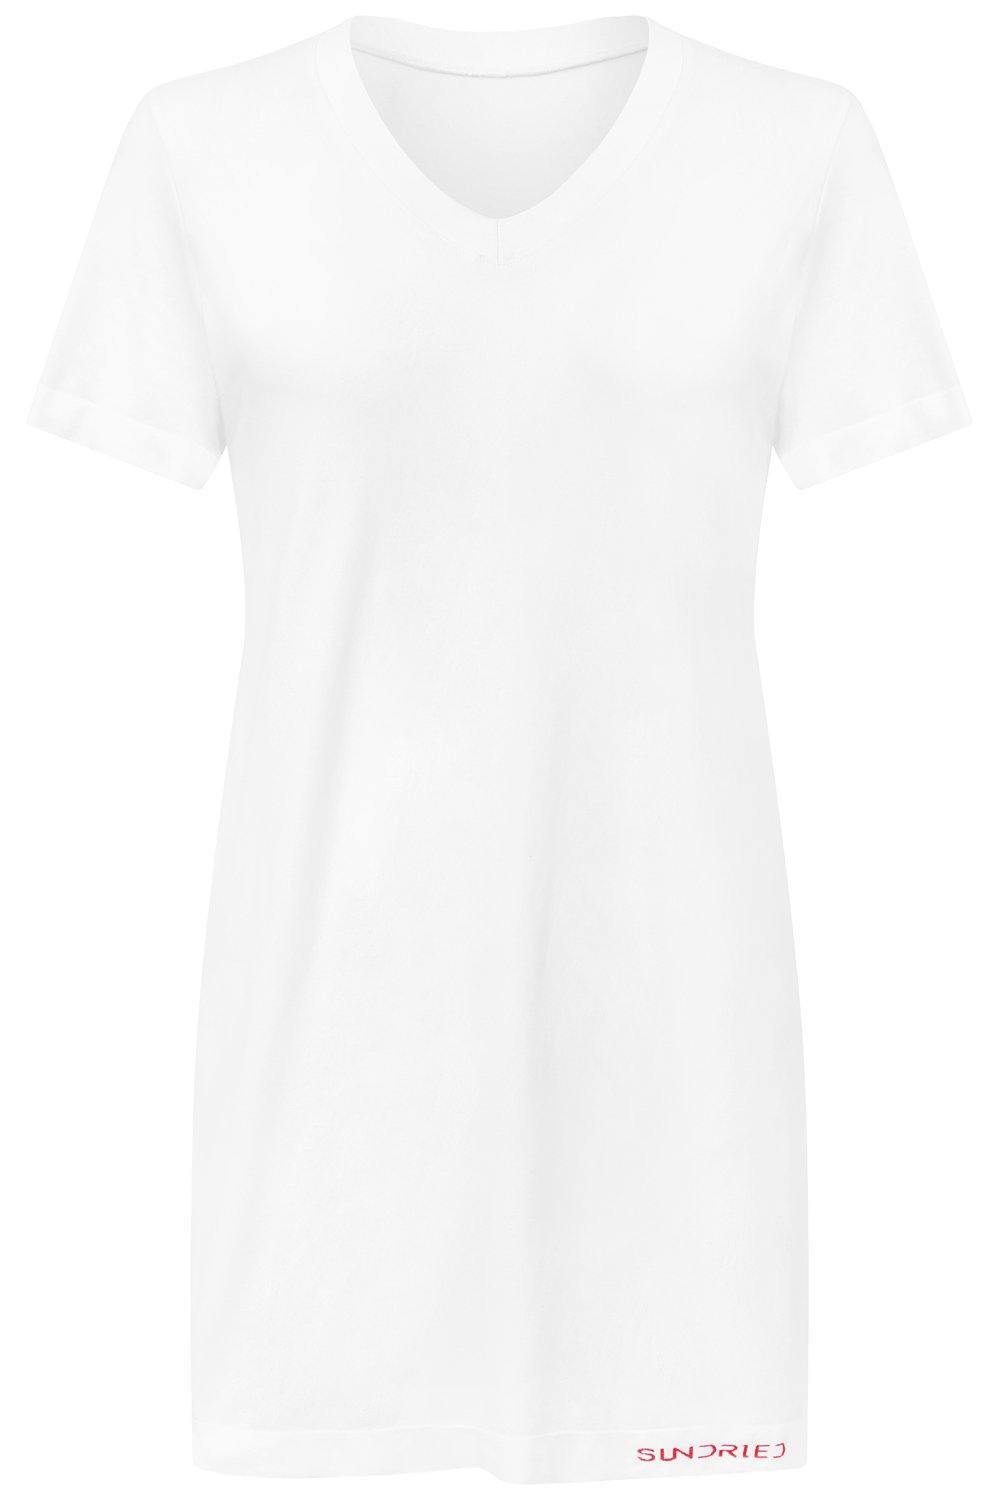 Sundried Eco Tech Women's Fitness Top T-Shirt S White SD0137 S White Activewear